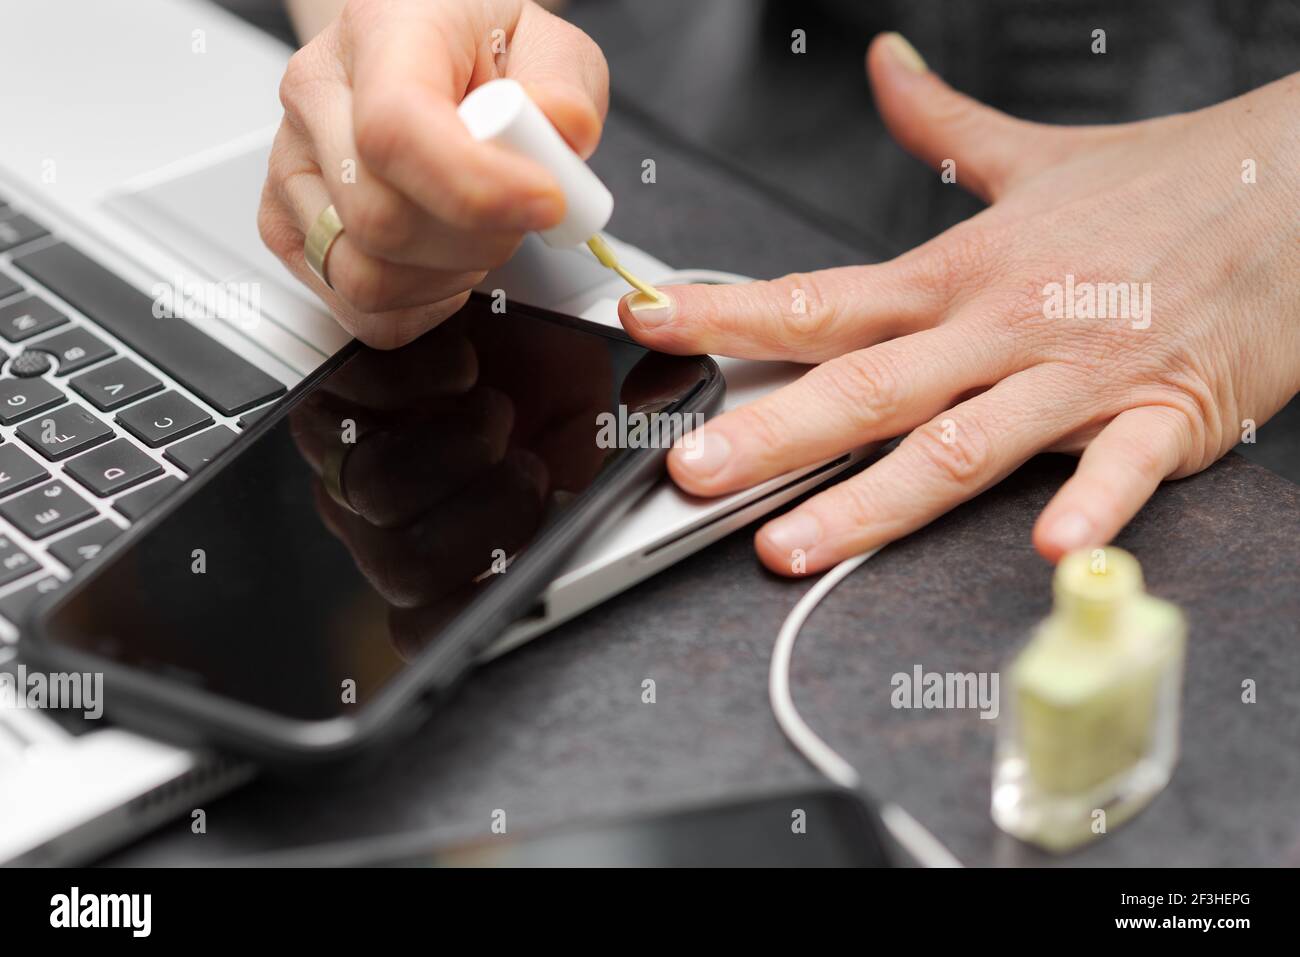 Female or male hands applying green nail polish on fingernails as stress relieve from work at desk in home office near laptop computer and smartphone Stock Photo